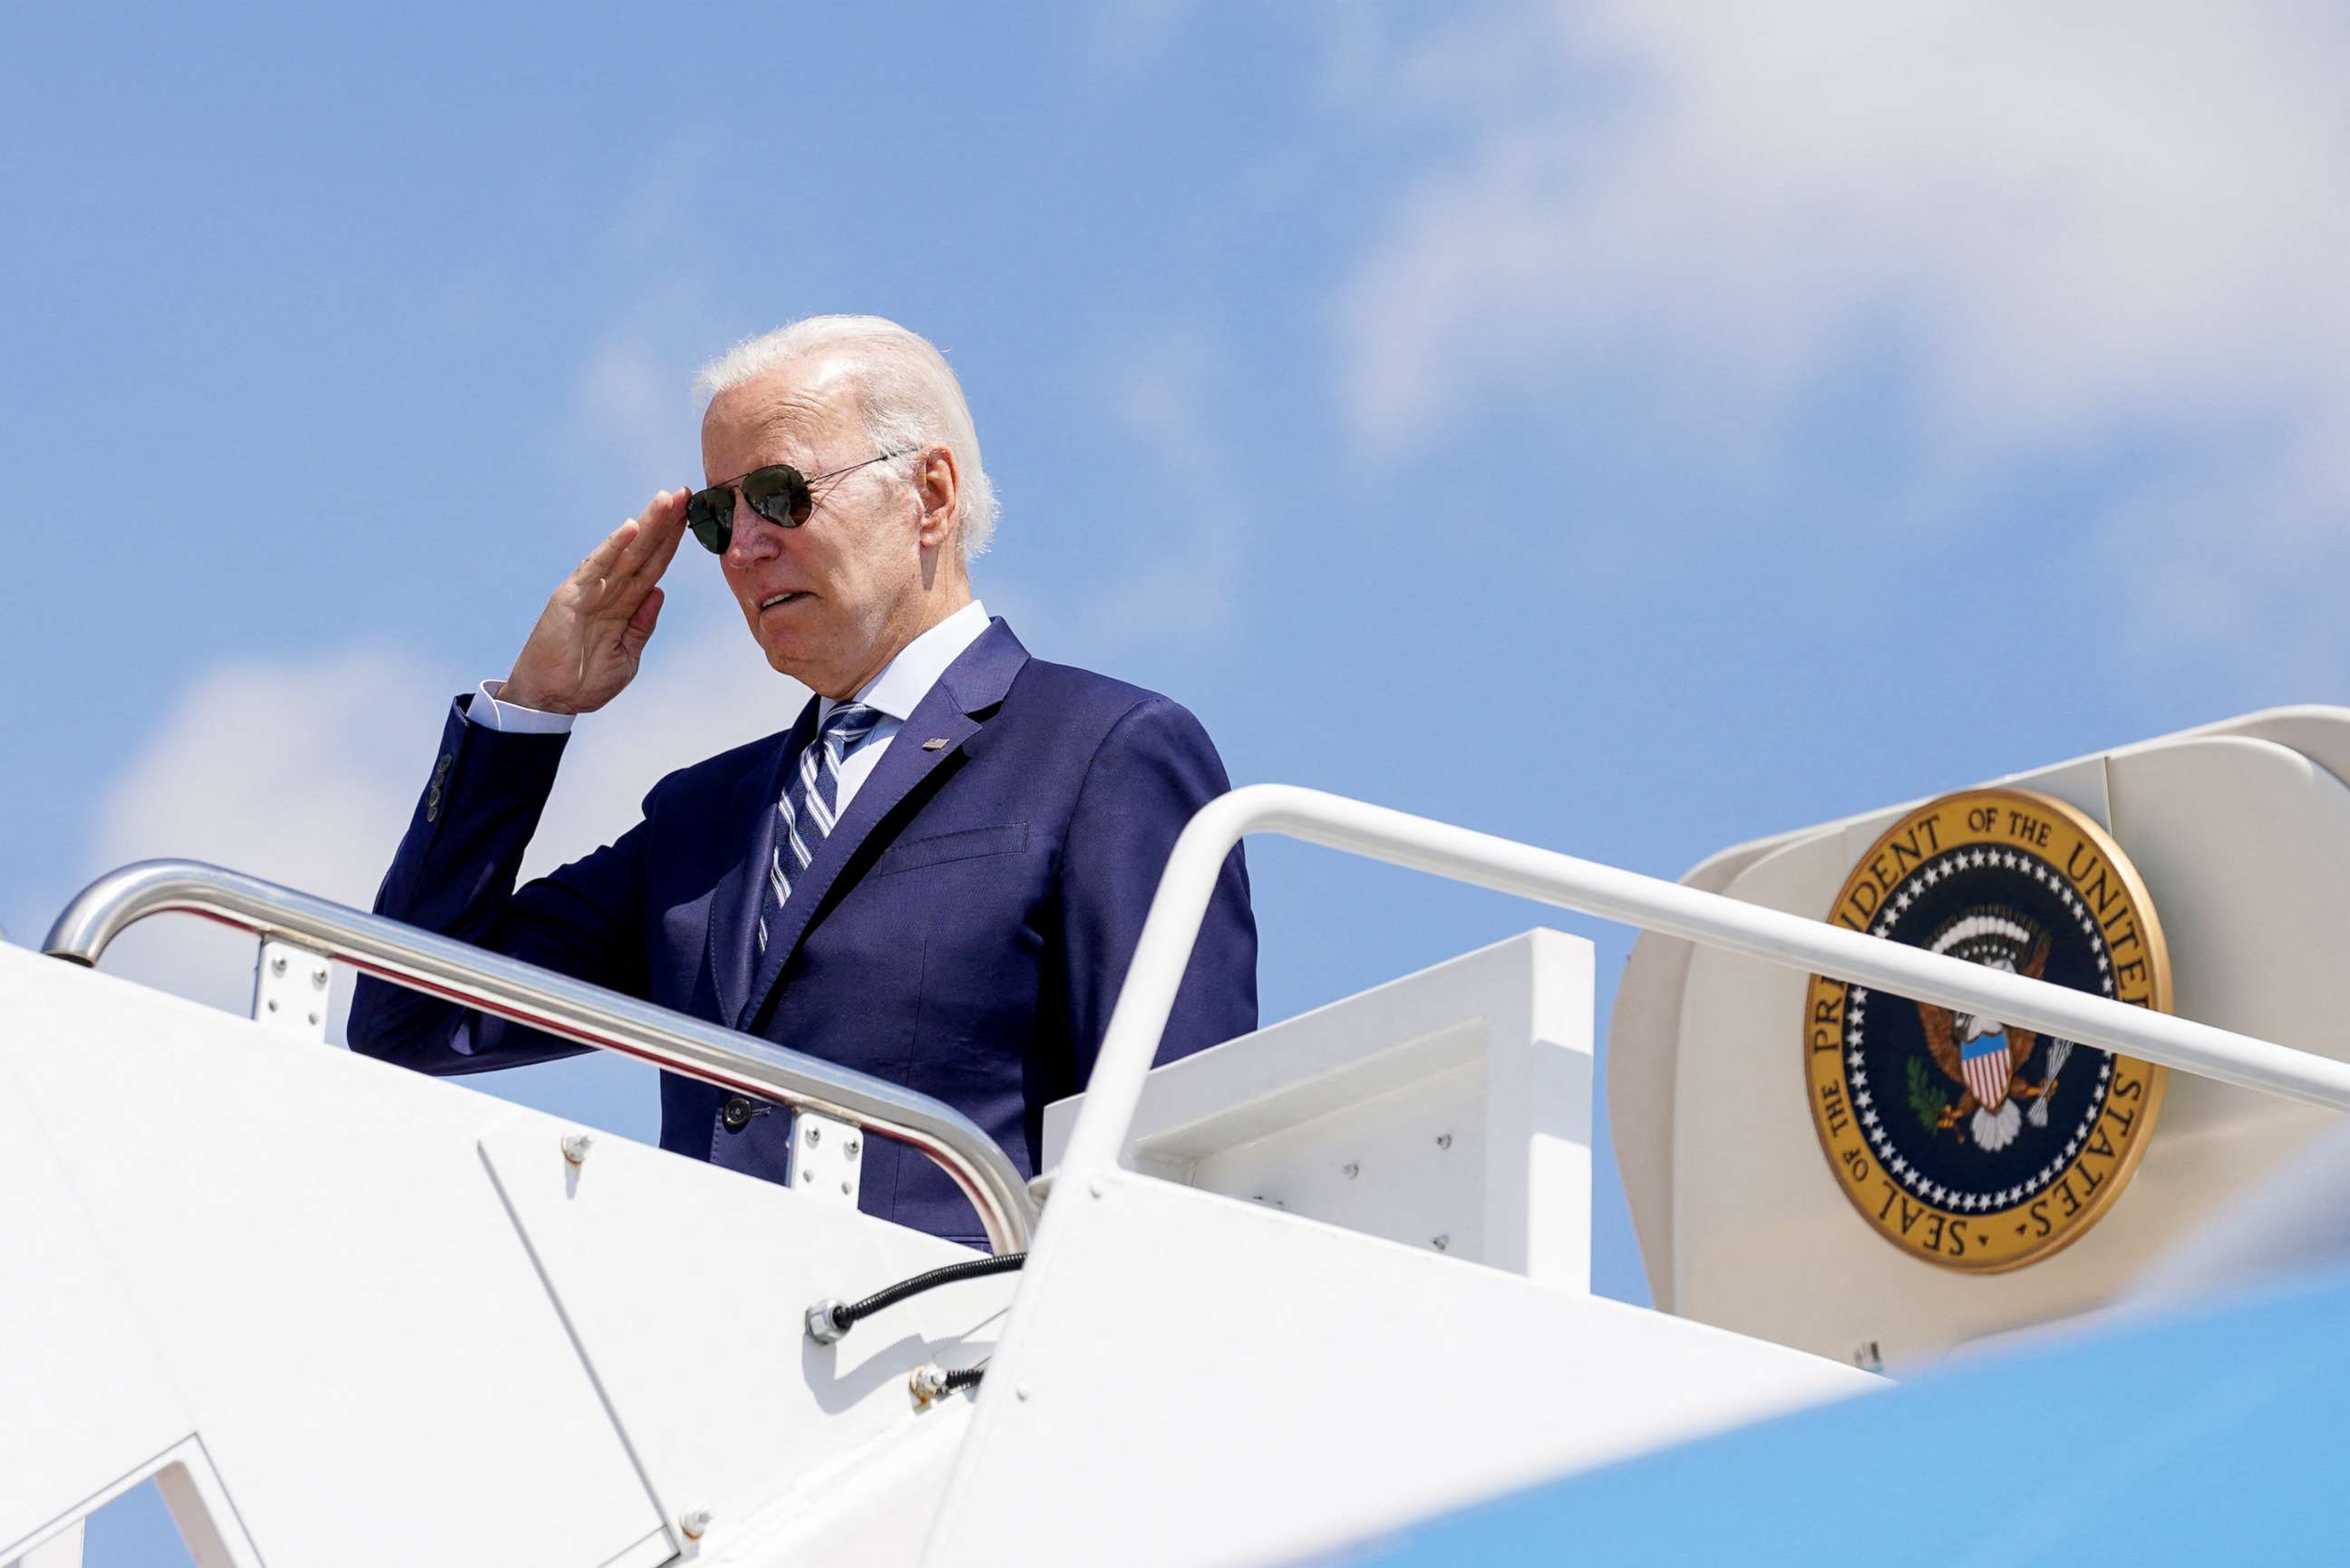 PHOTO: President Joe Biden salutes as he boards Air Force One to take off en route to Avoca, Pennsylvania, in Joint Base Andrews, Md., Aug. 30, 2022.